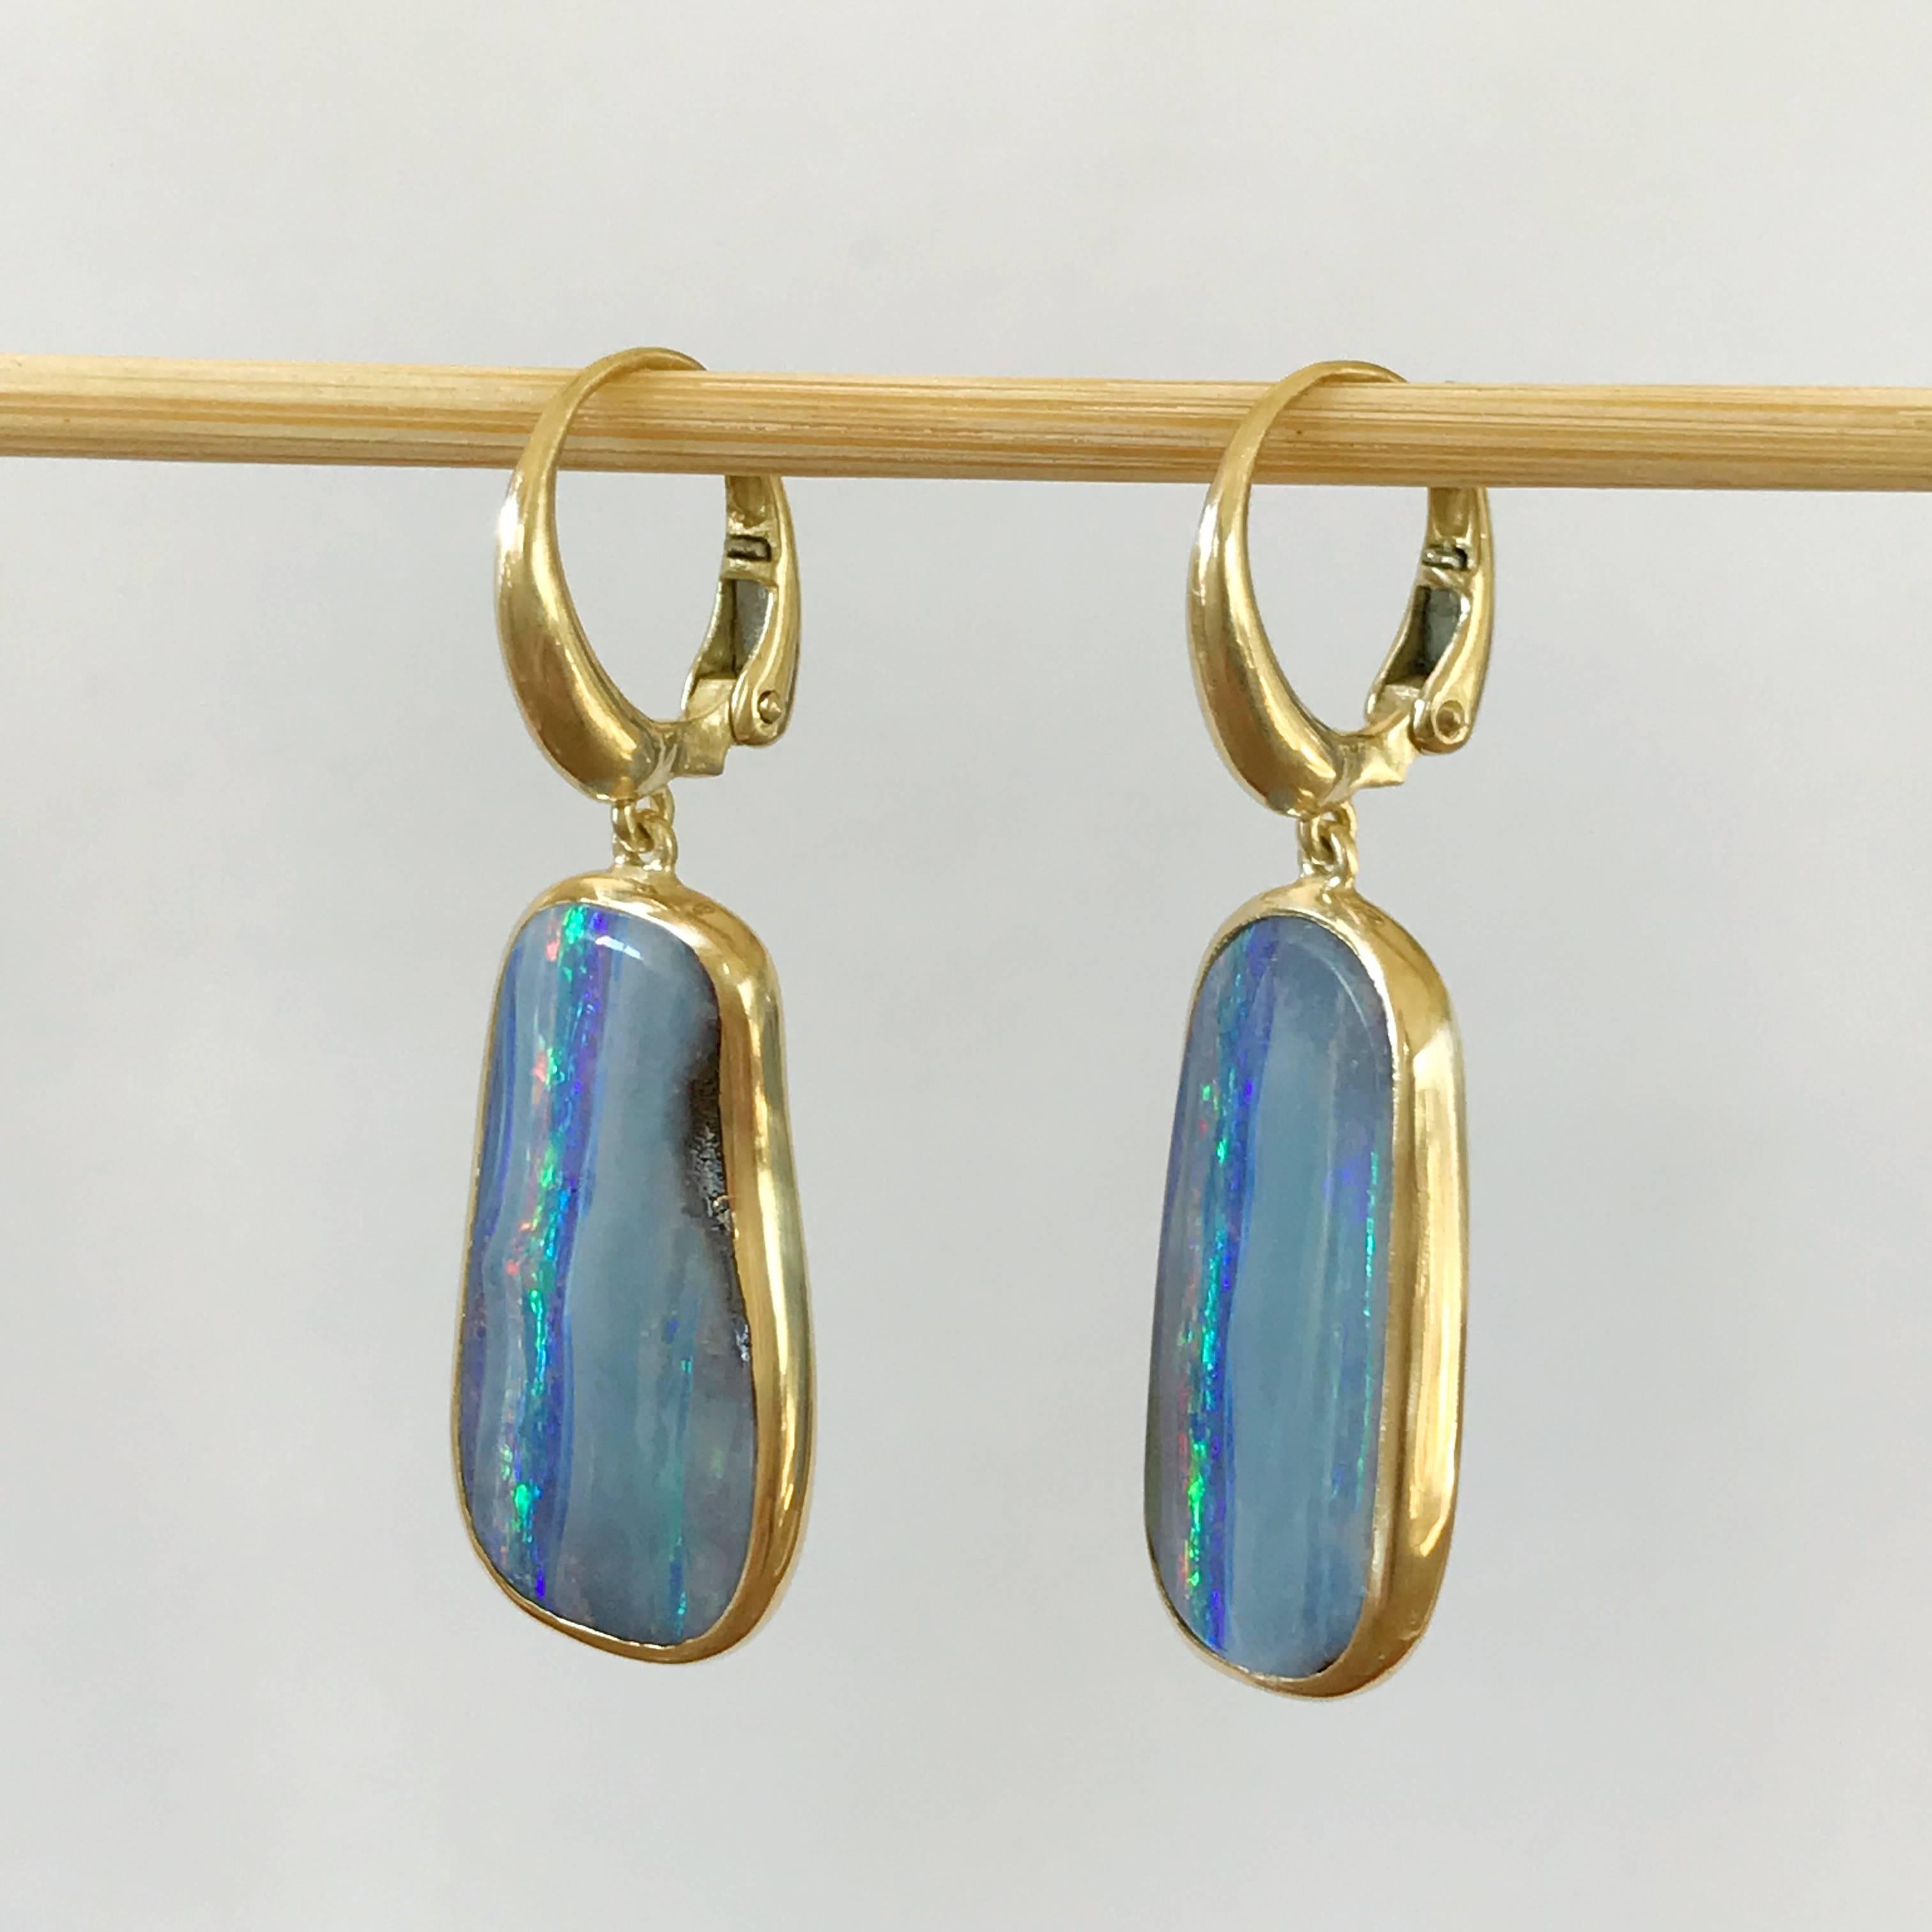 One of a kind 18k yellow gold semi lucid finishing dangle earrings with two light blue - violet bezel set Australian Boulder Opals weighing 18,4 carats.  
Opal Dimension without leverback: 
width 13 mm height  24,5 mm  
height with leverback 40